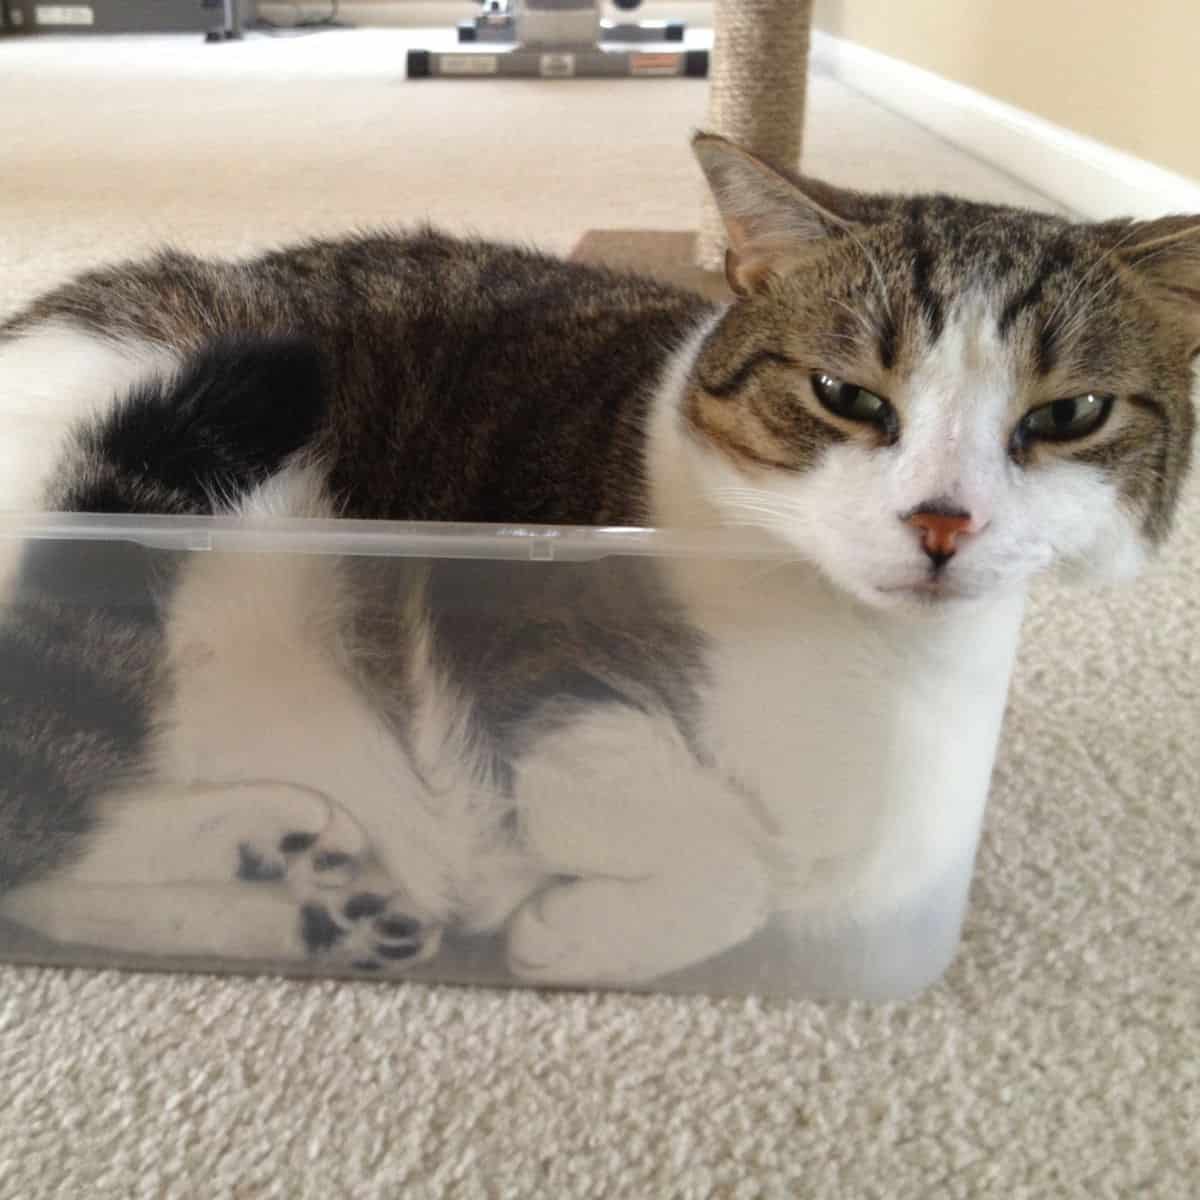 photo of cat in a plastic container looking at the camera